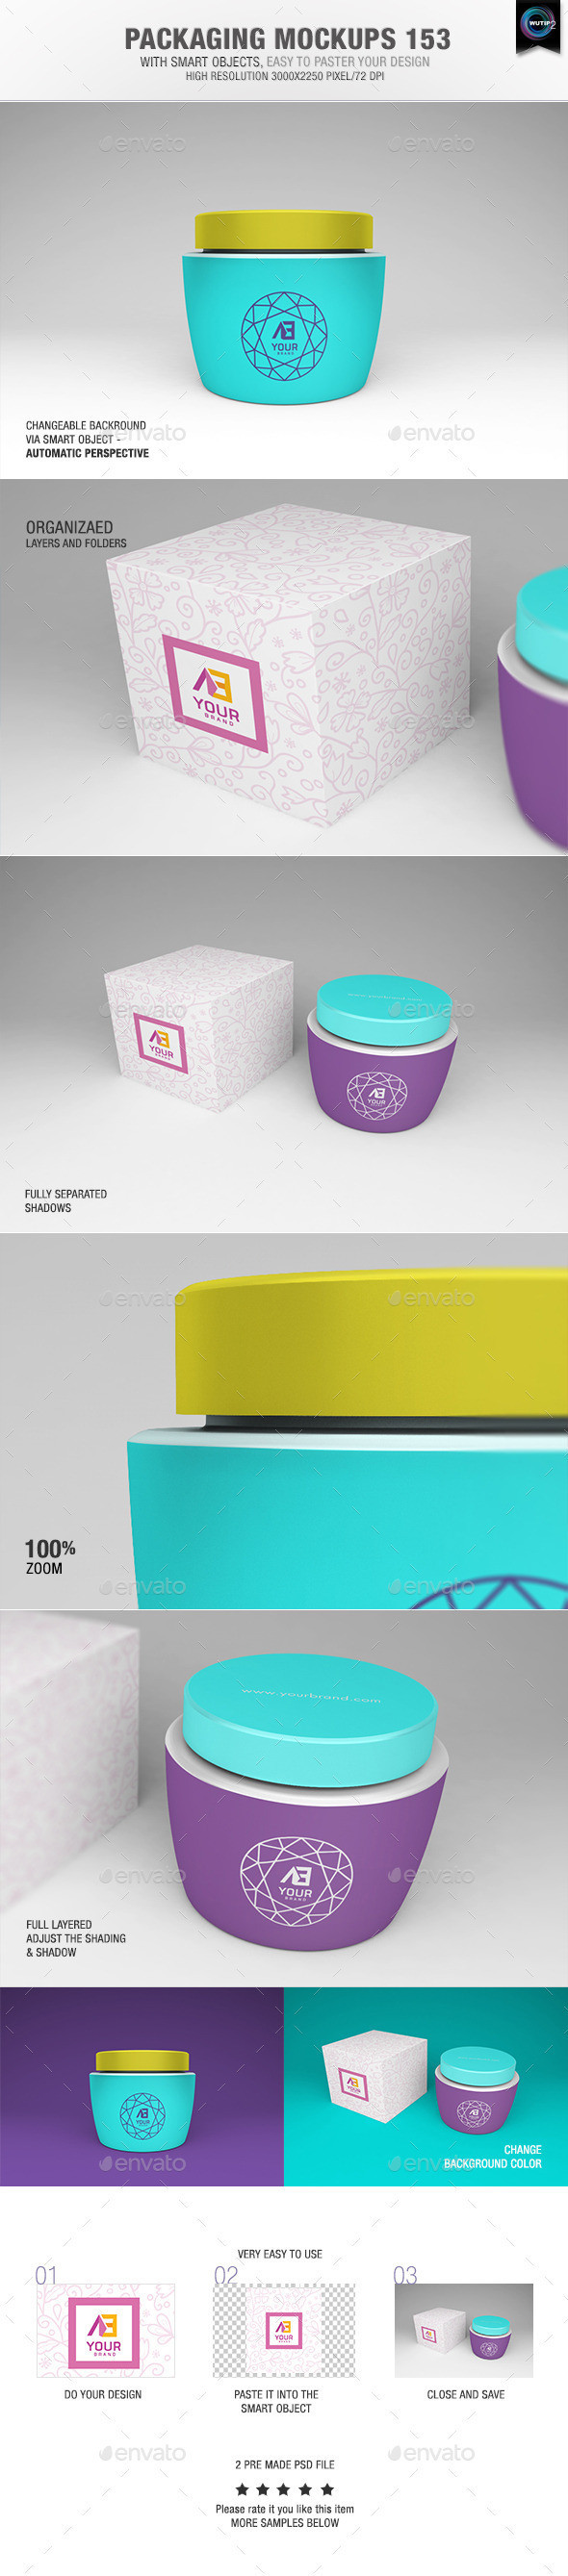 Packaging 20mockups 20153 20preview